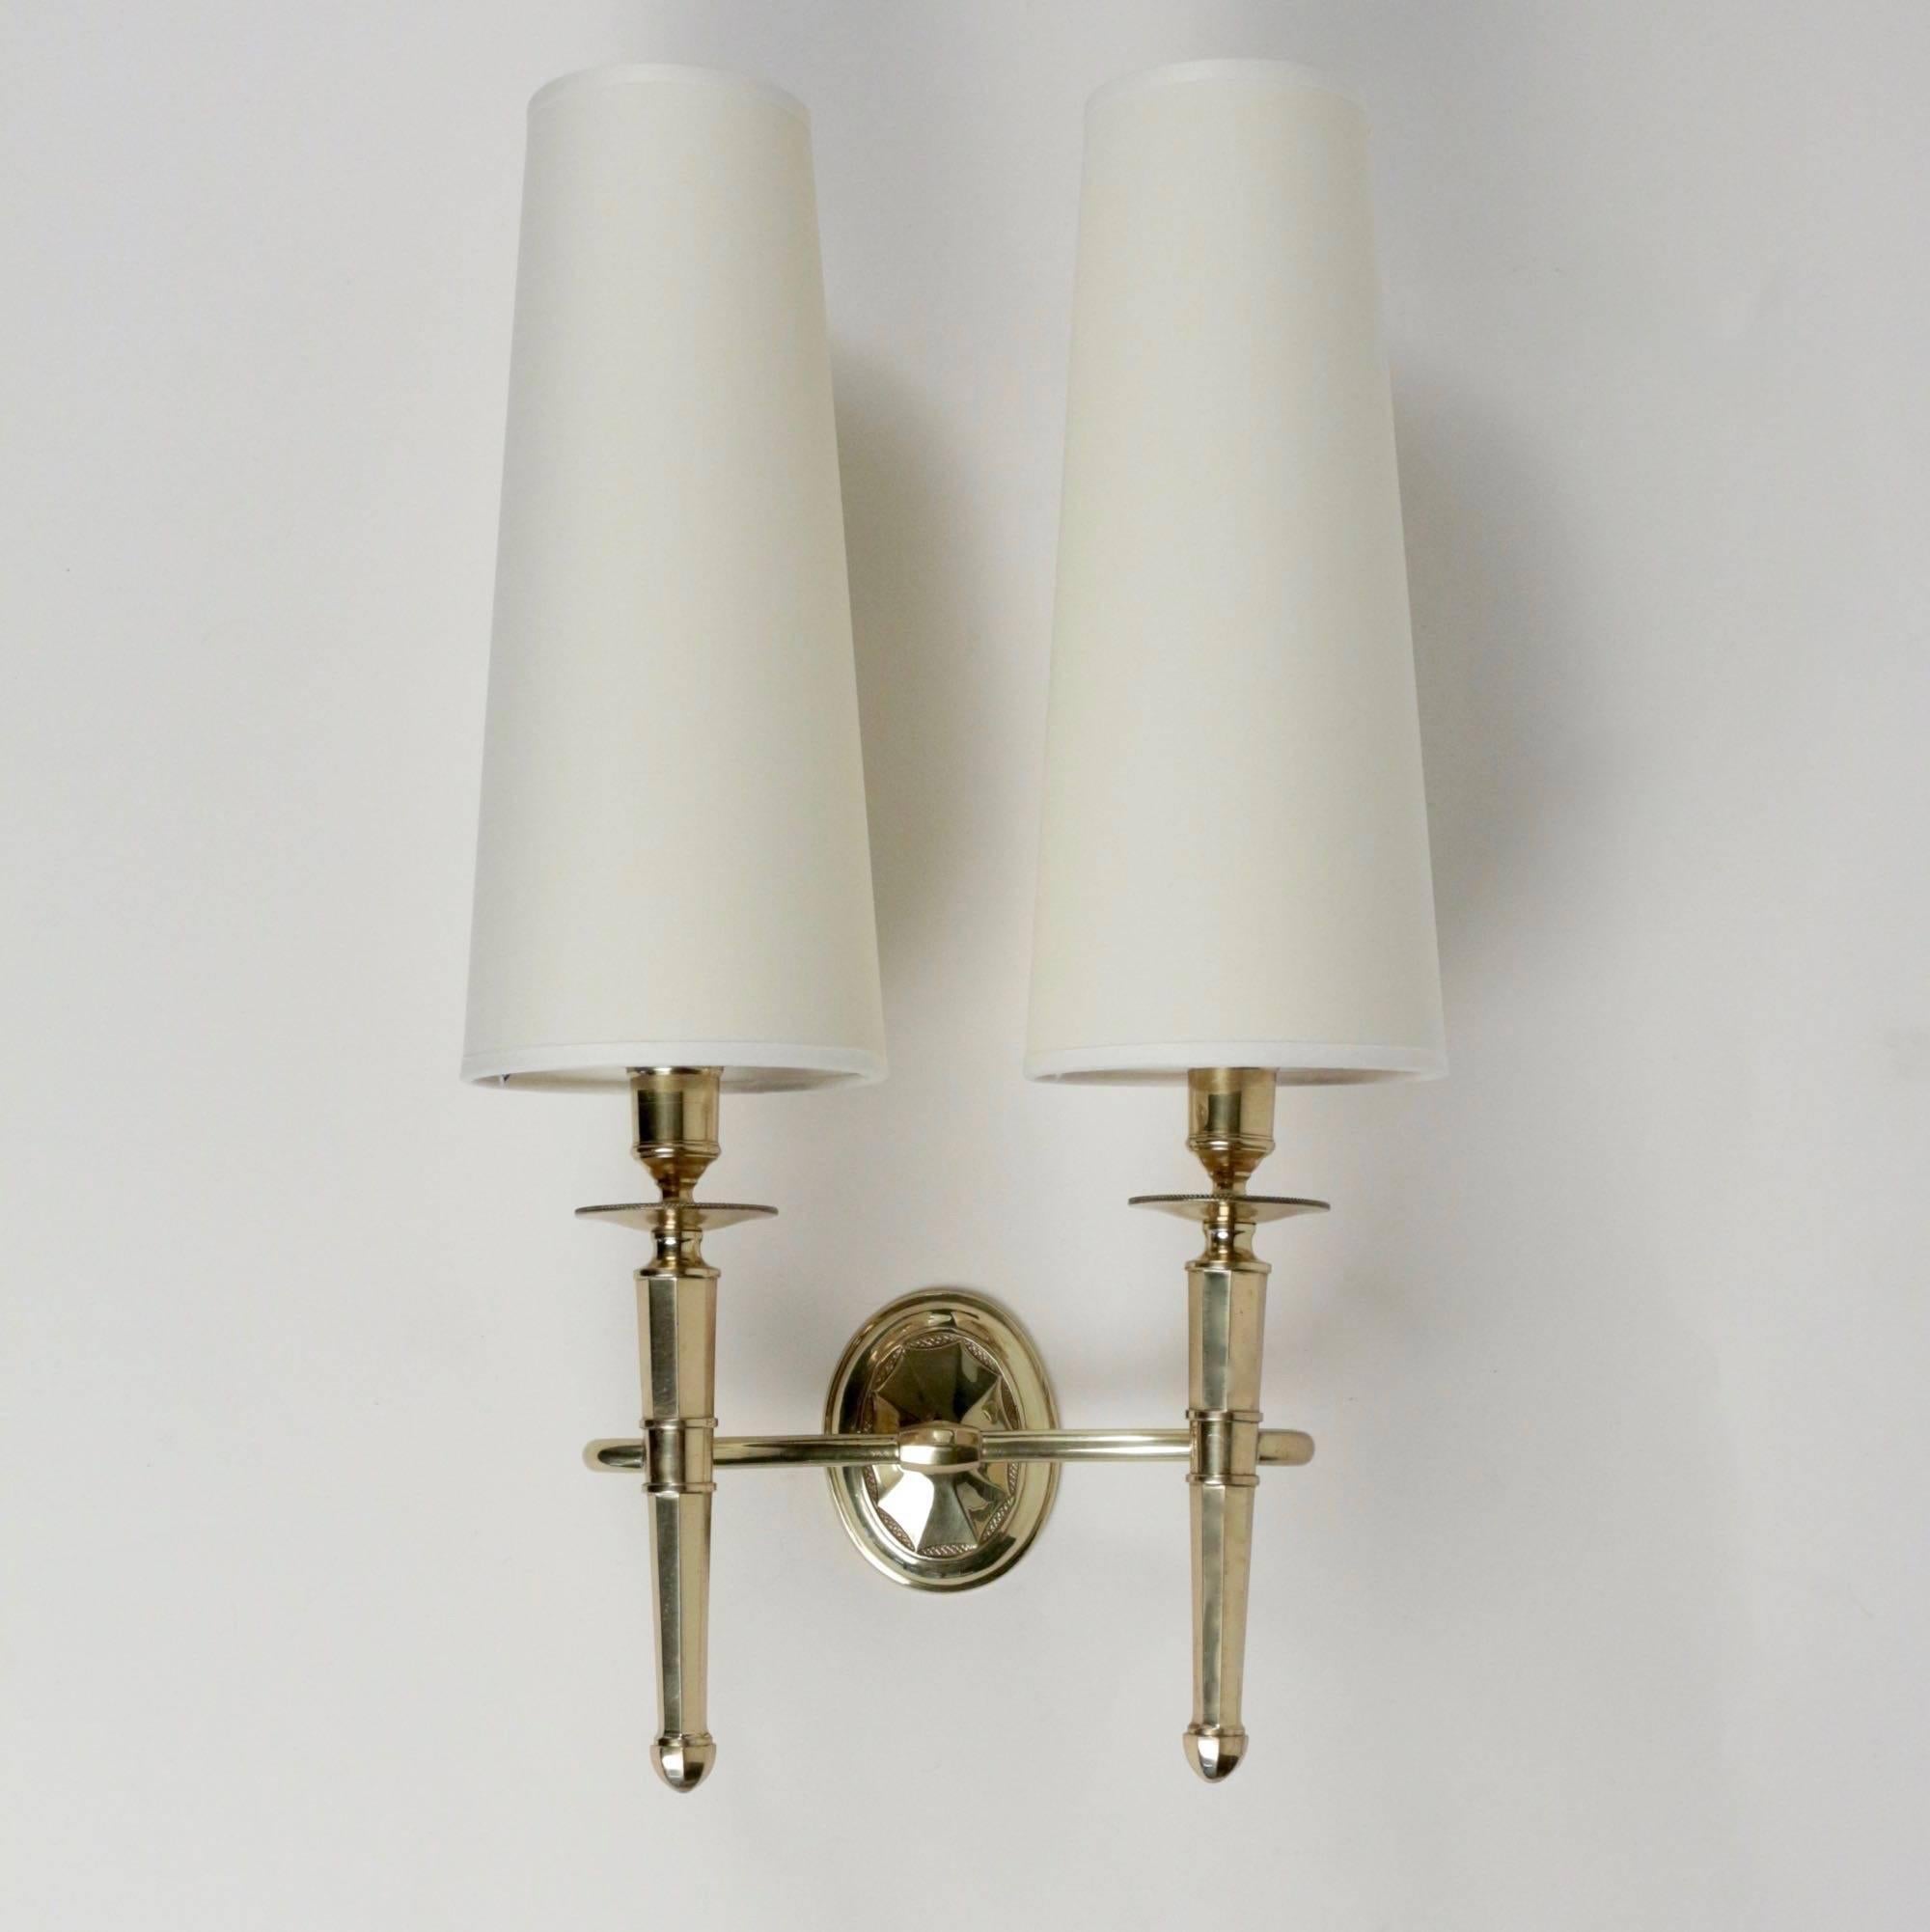 1950 series of three gilt bronze wall lights from Maison Honorée.

This set of wall lights consists of a pair of double wall lights and a triple arm wall light.

Each wall lamp rests on an oval-shaped wall plate with cut sides adorned with 